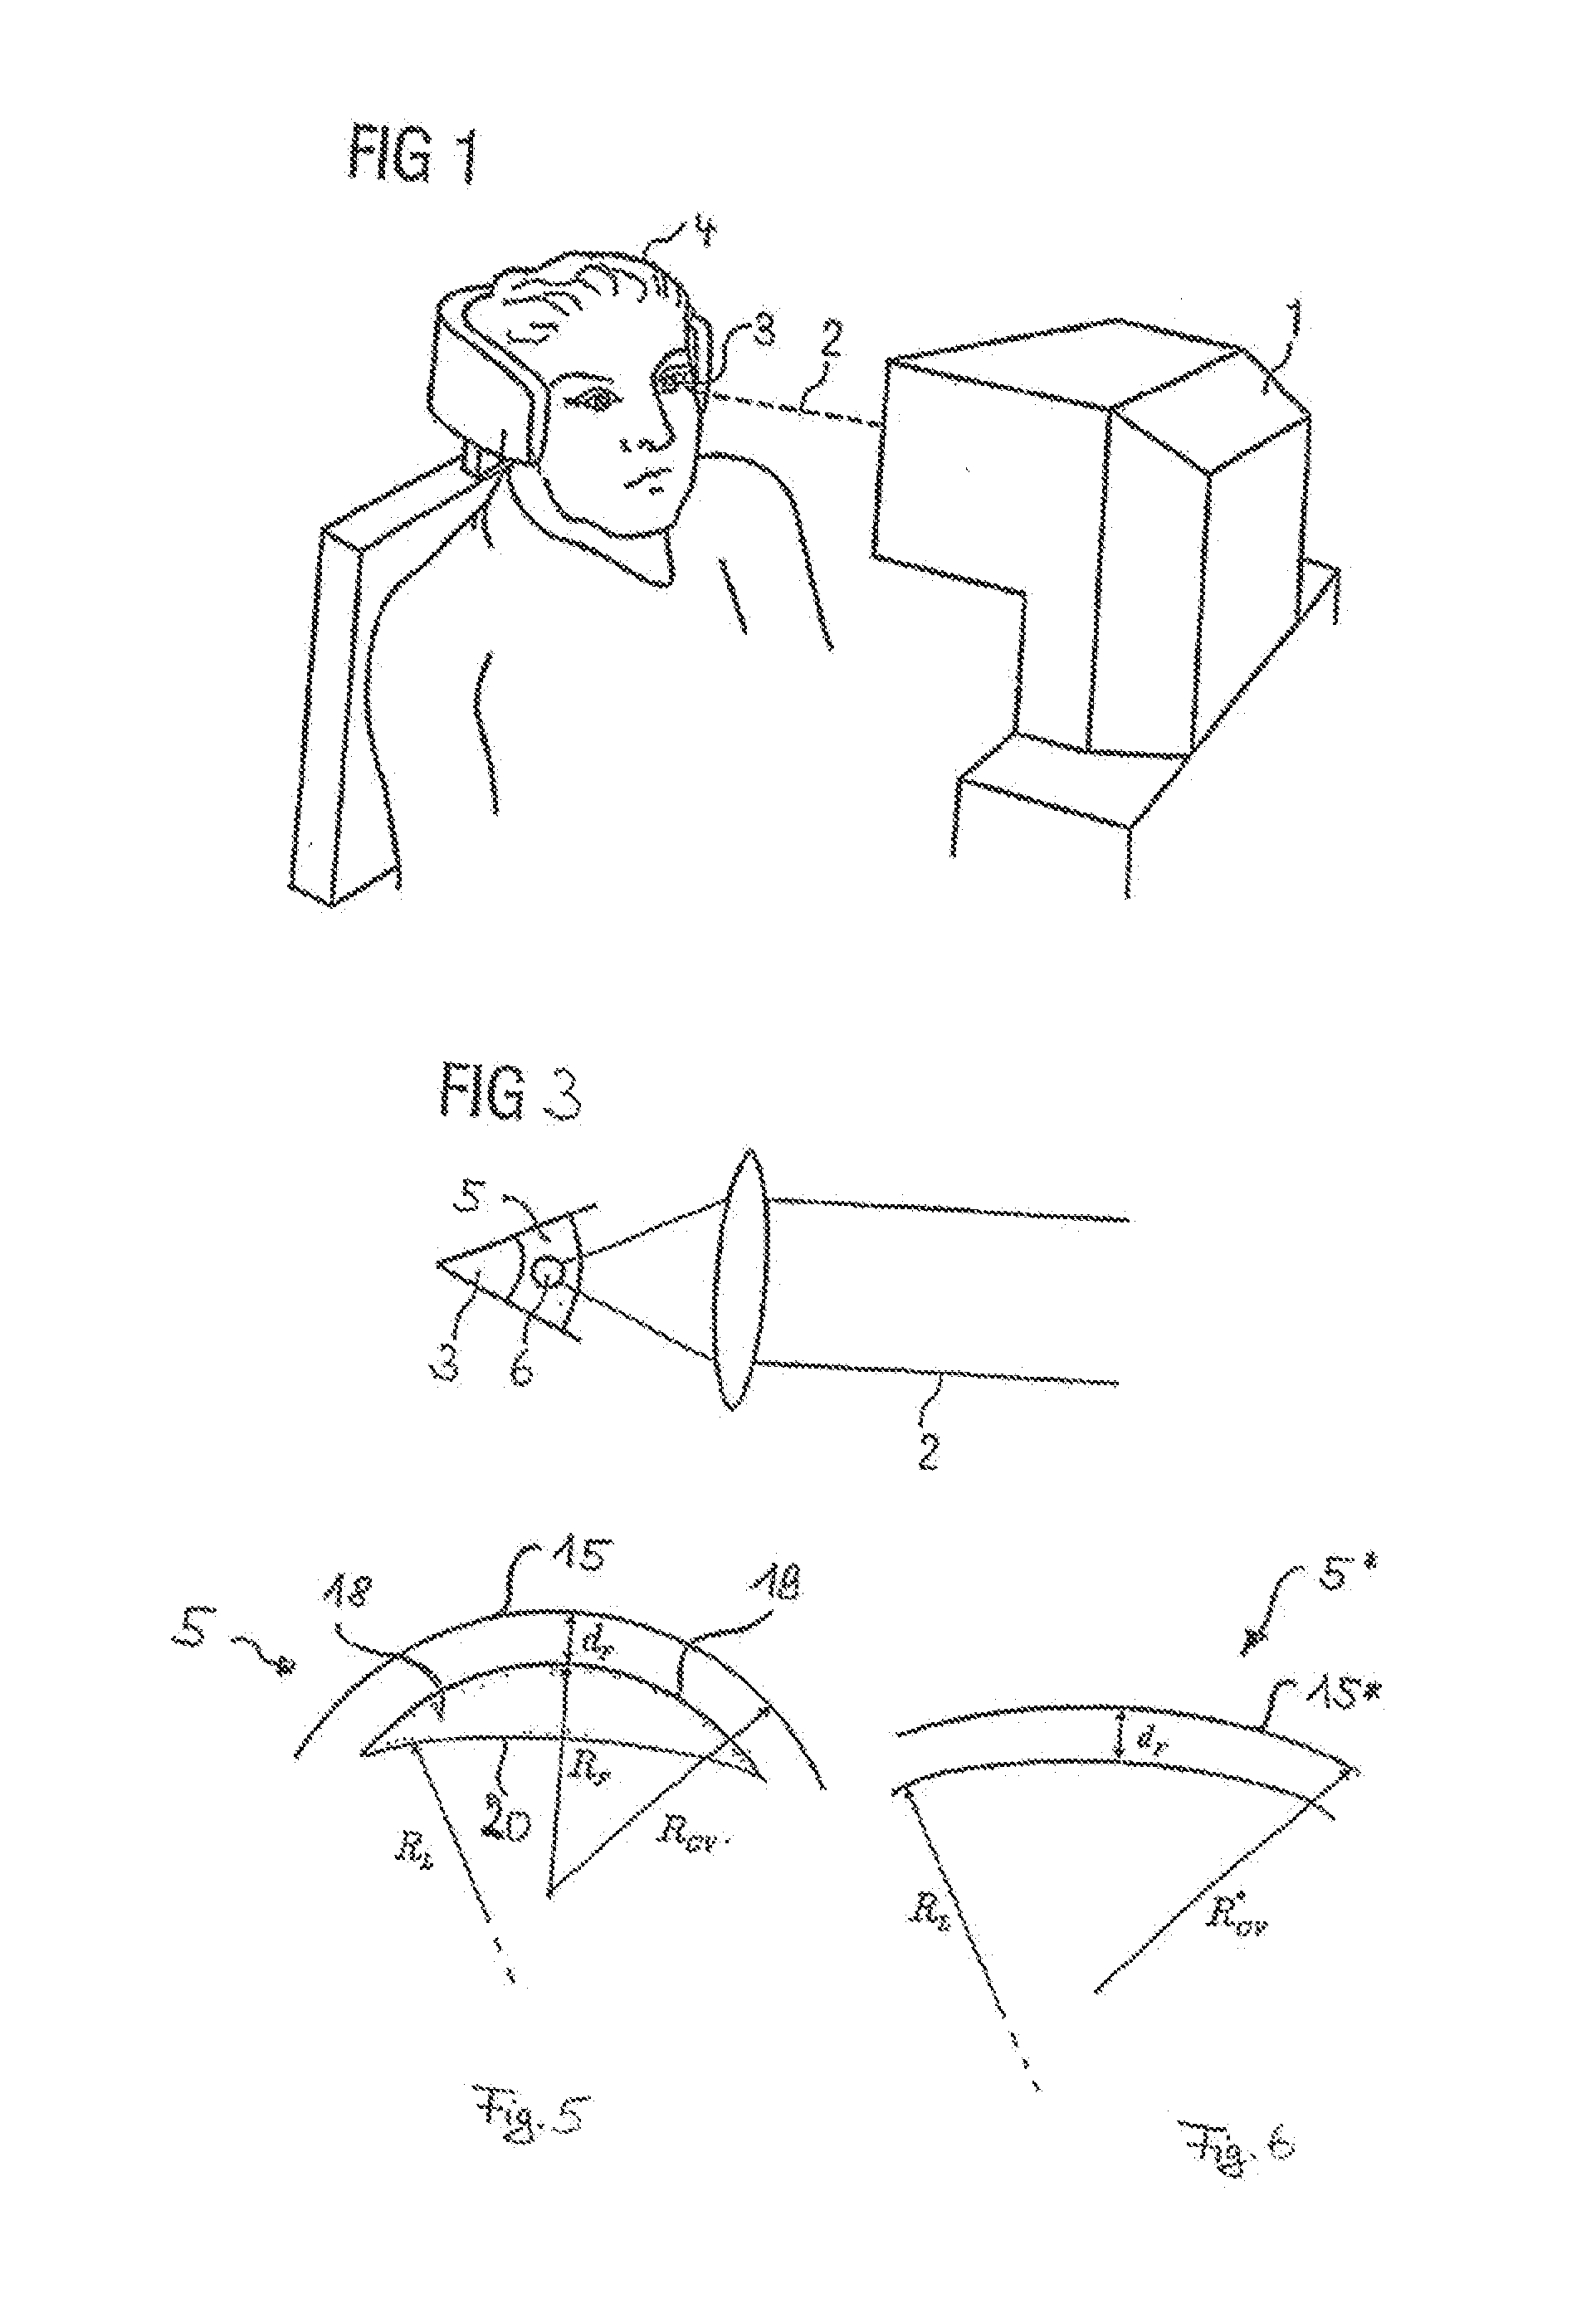 Device and method for producing control data for the surgical correction of defective eye vision